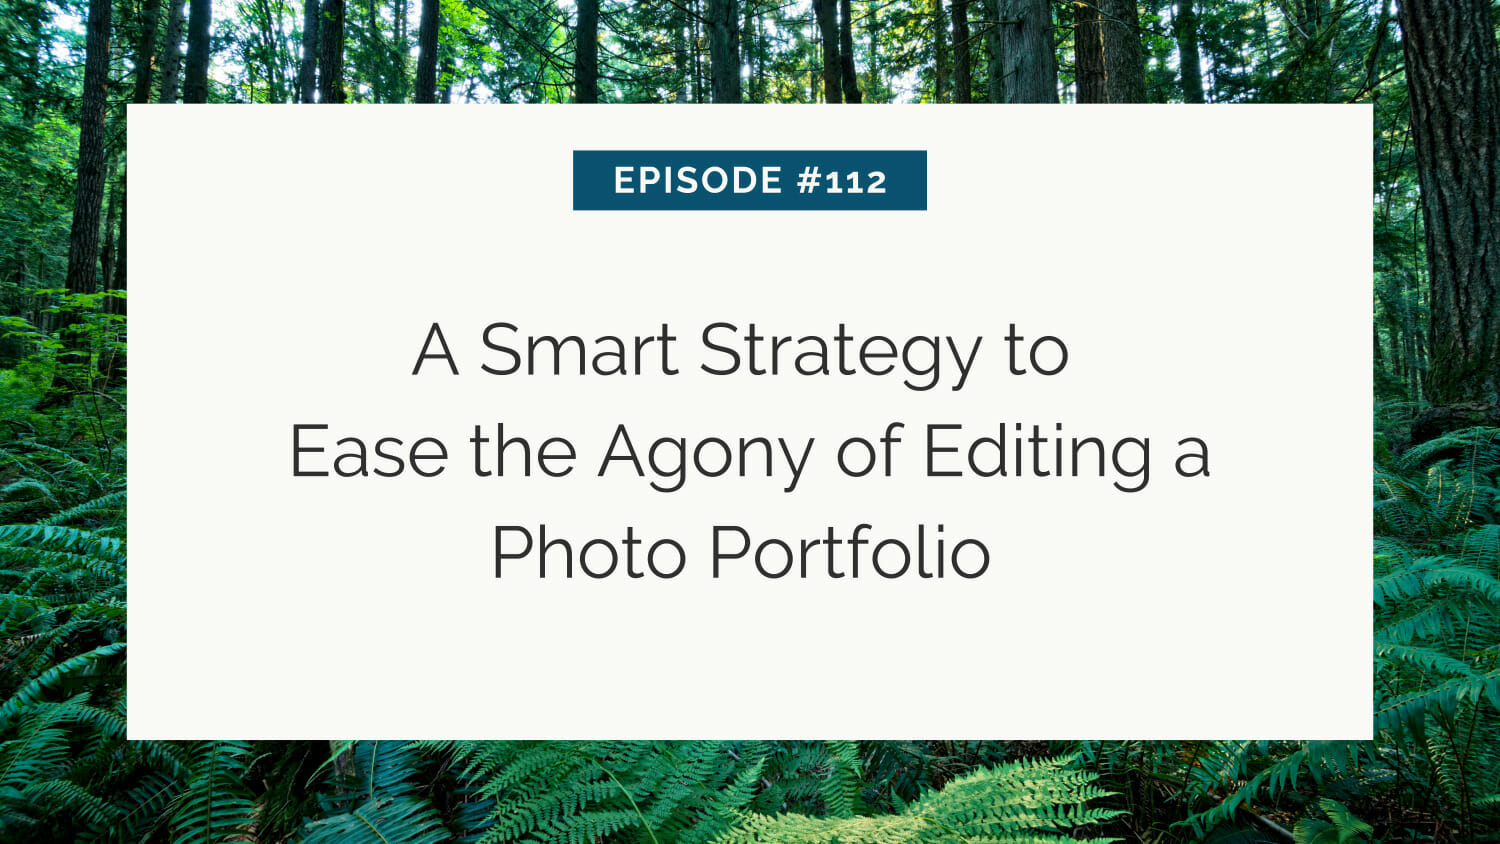 Slide with title "a smart strategy to ease the agony of editing a photo portfolio" against a forest background for episode #112.